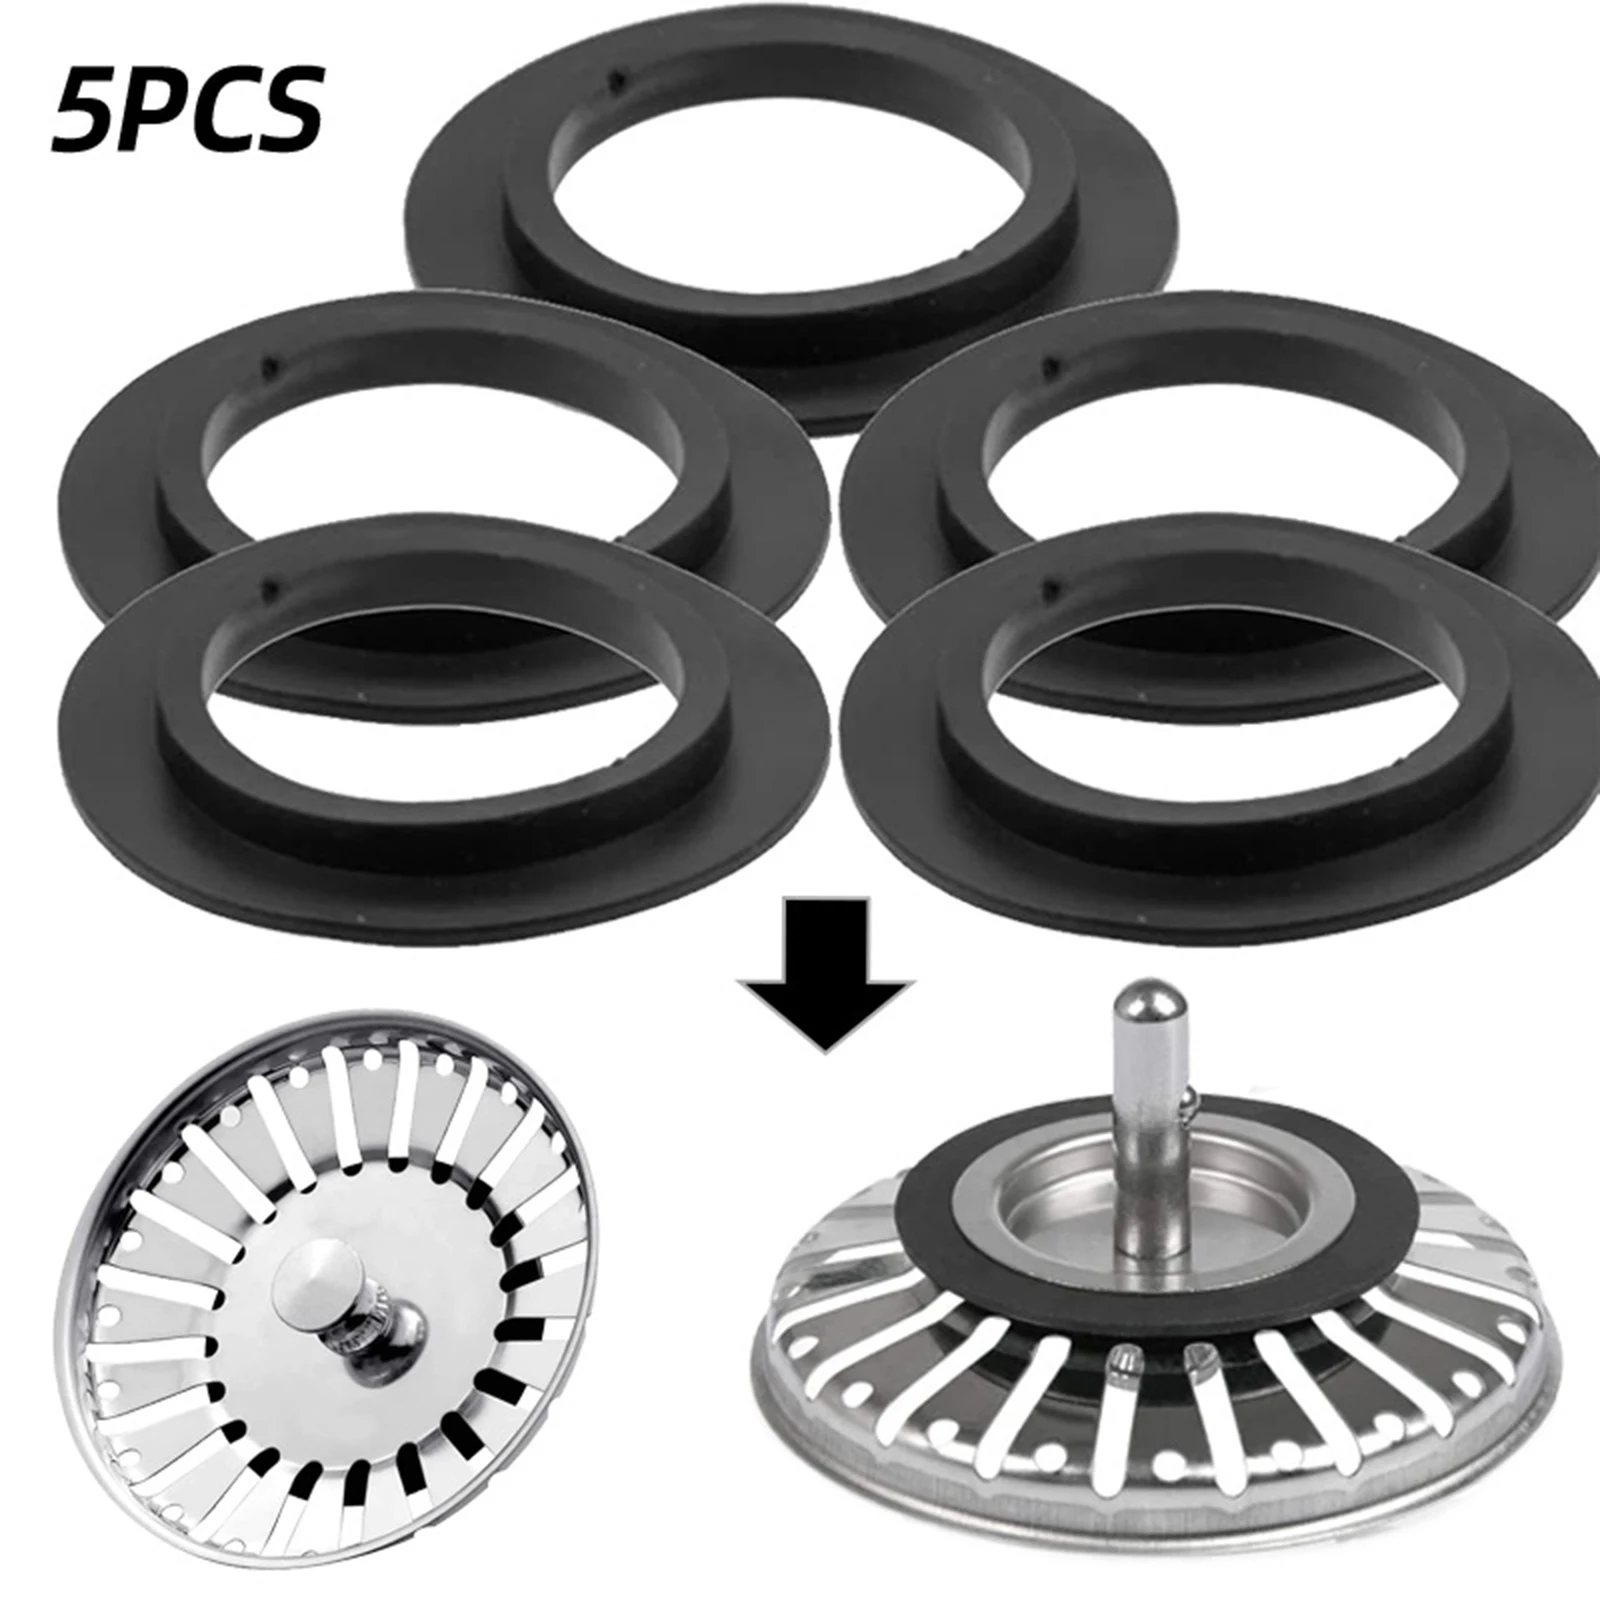 5Pcs Rubber Waterproof Gasket Strainer Seals Durable O-ring Washer Gaskets Kitchen Sink Filter Replacement Accessories acecare 225pcs rubber o ring oil resistance o ring washer seals watertightness assortment different size with plactic box kit se